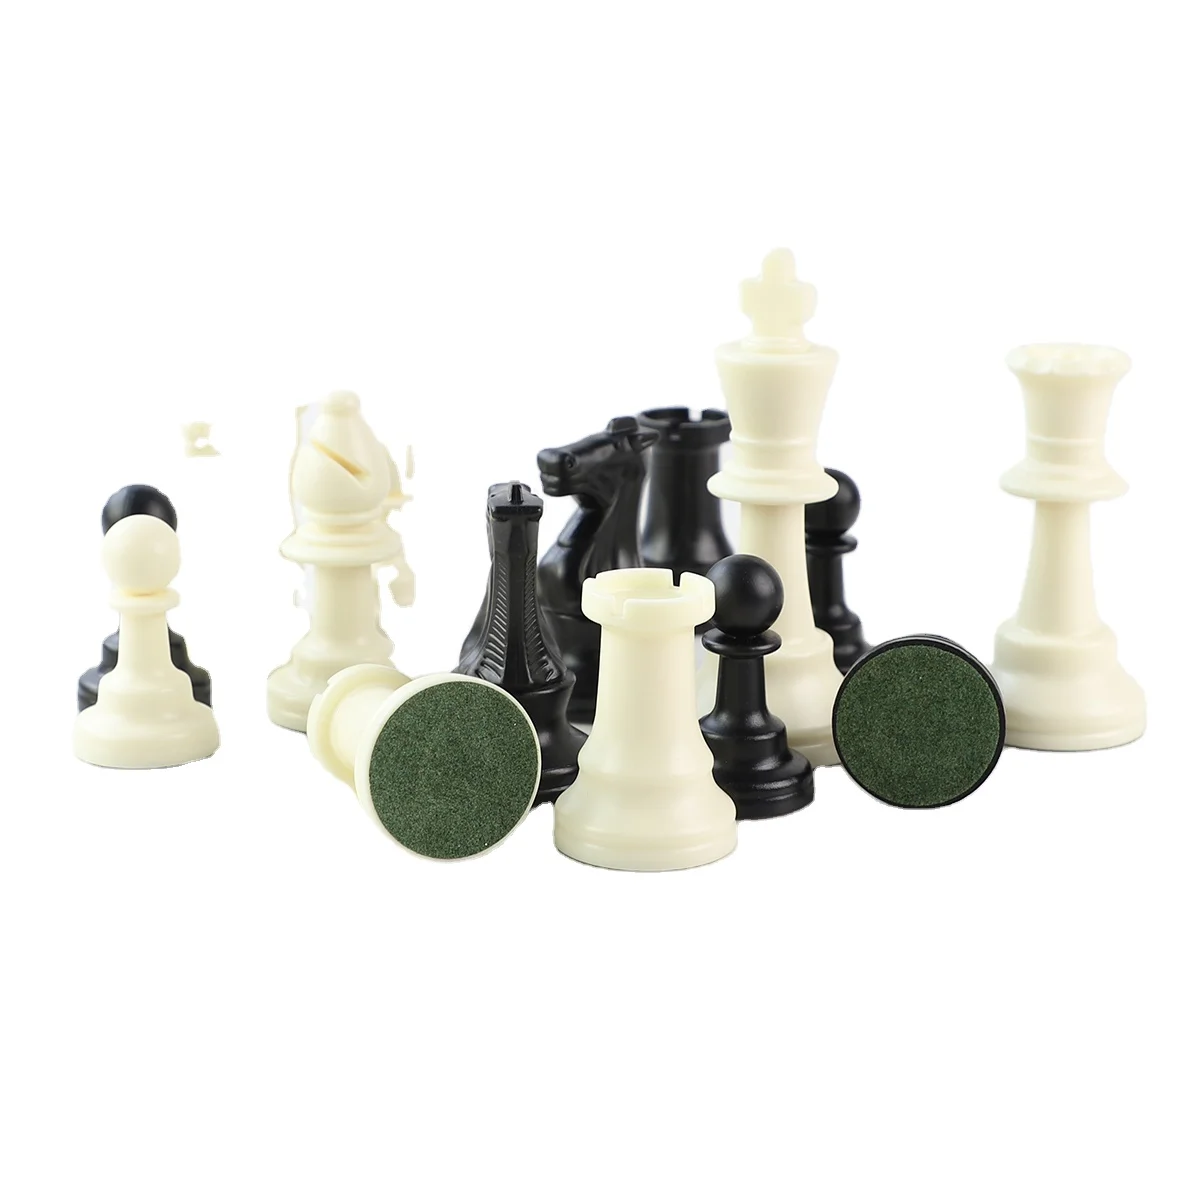 

LEAP standard 3.75 inch 9.7 King PS tournament plastic chess pieces for tournament chess board